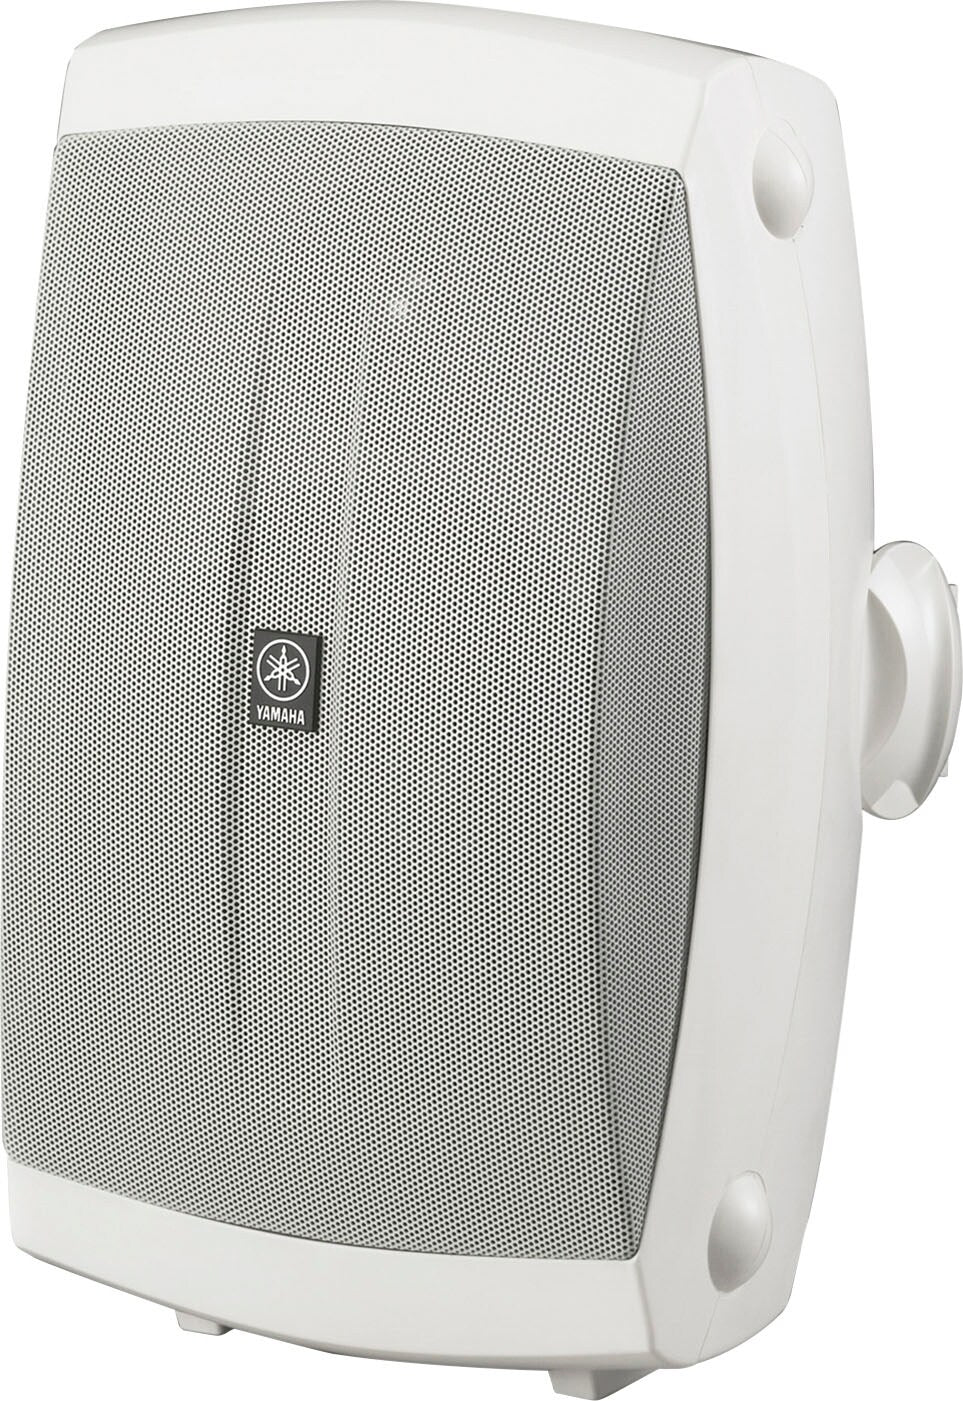 Yamaha - 2-Way High-Performance Wall-Mount Outdoor Speakers - White_1